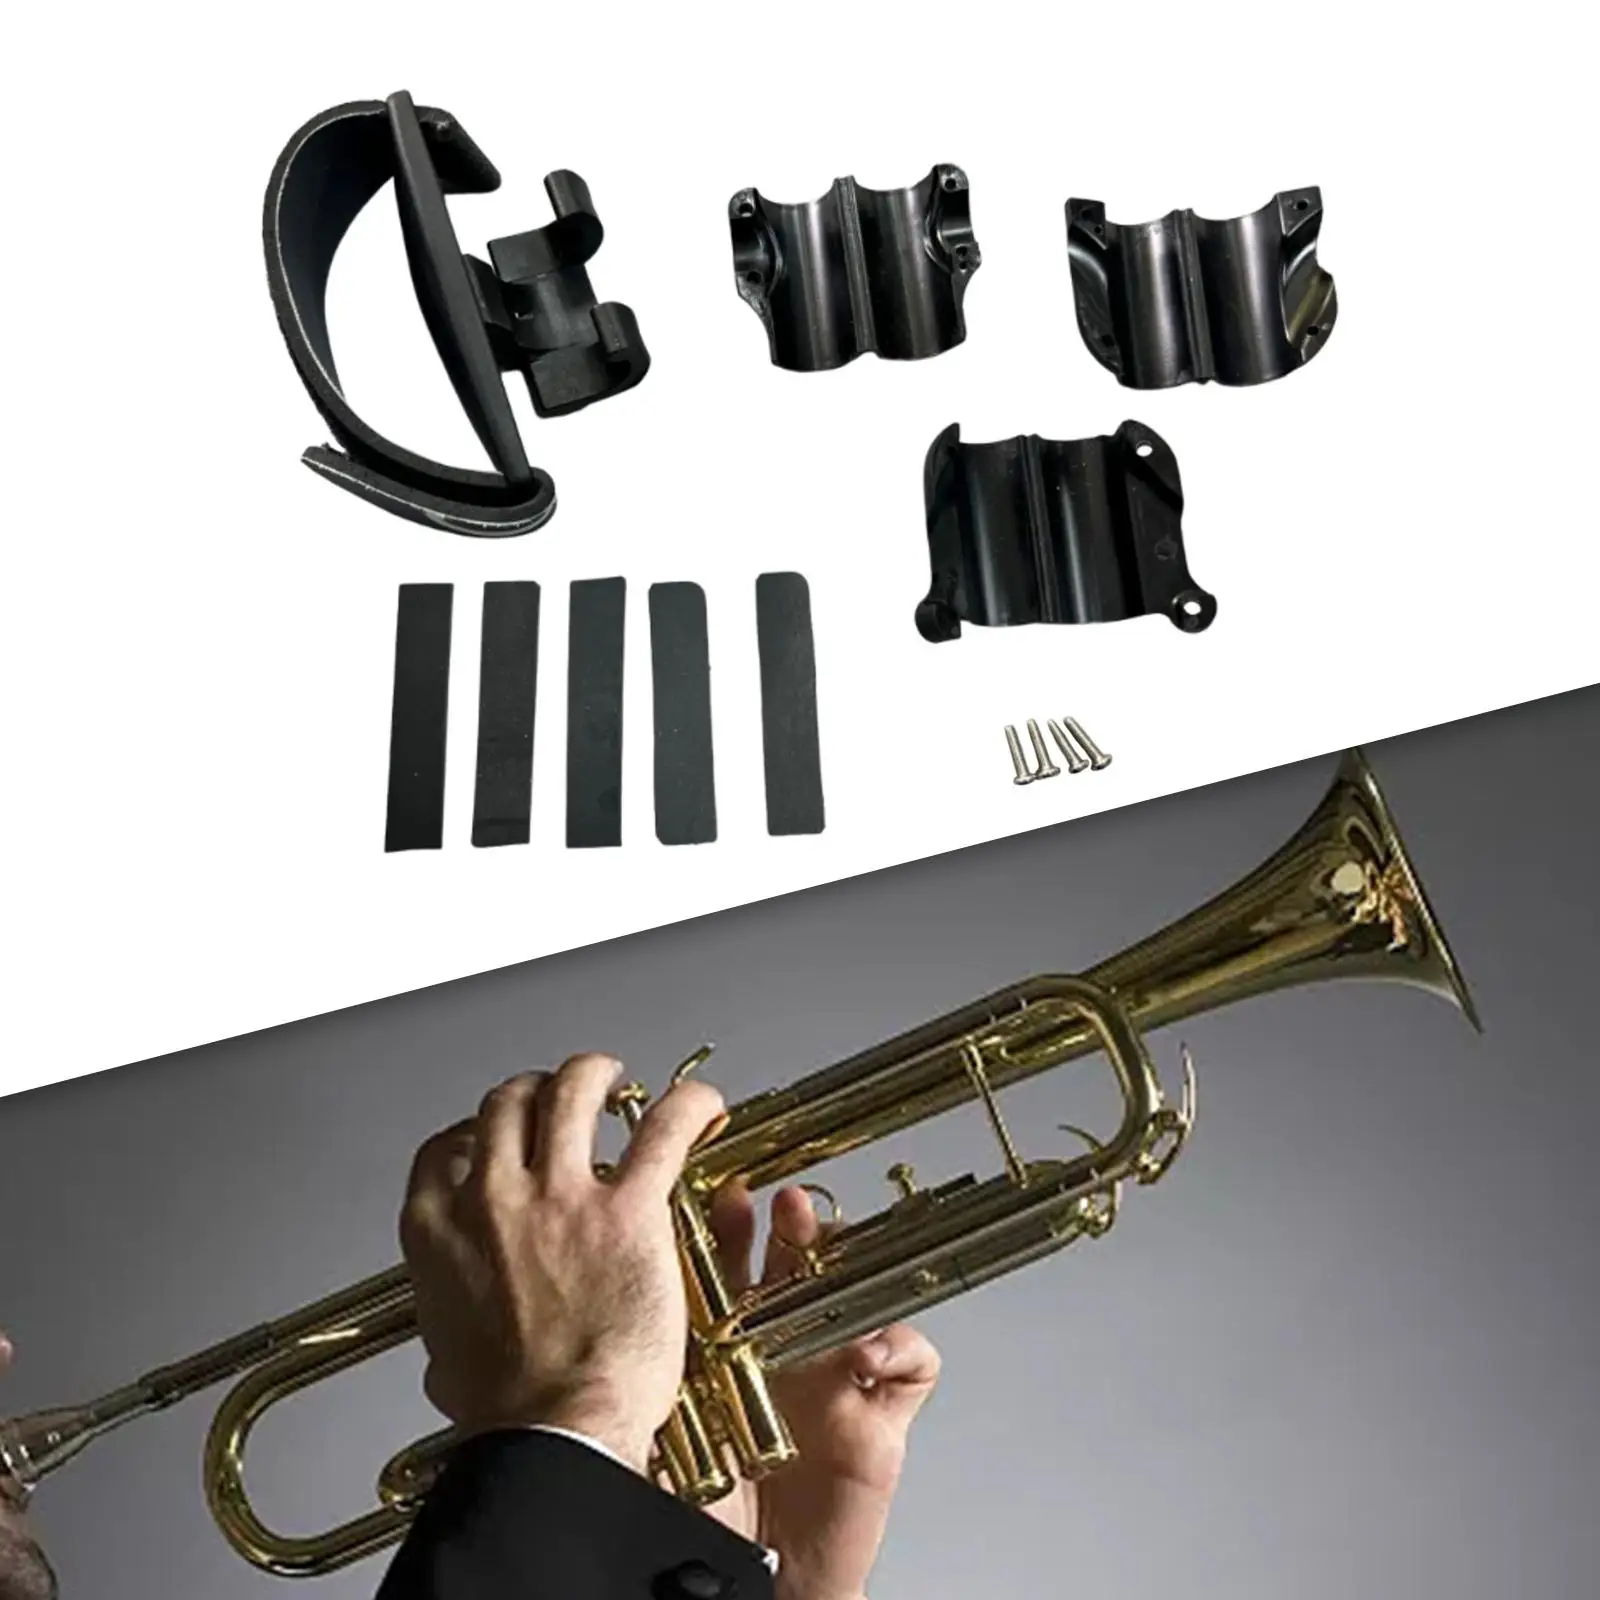 Trombone Grip Practical Maintain A Proper Playing Position Protection Musician